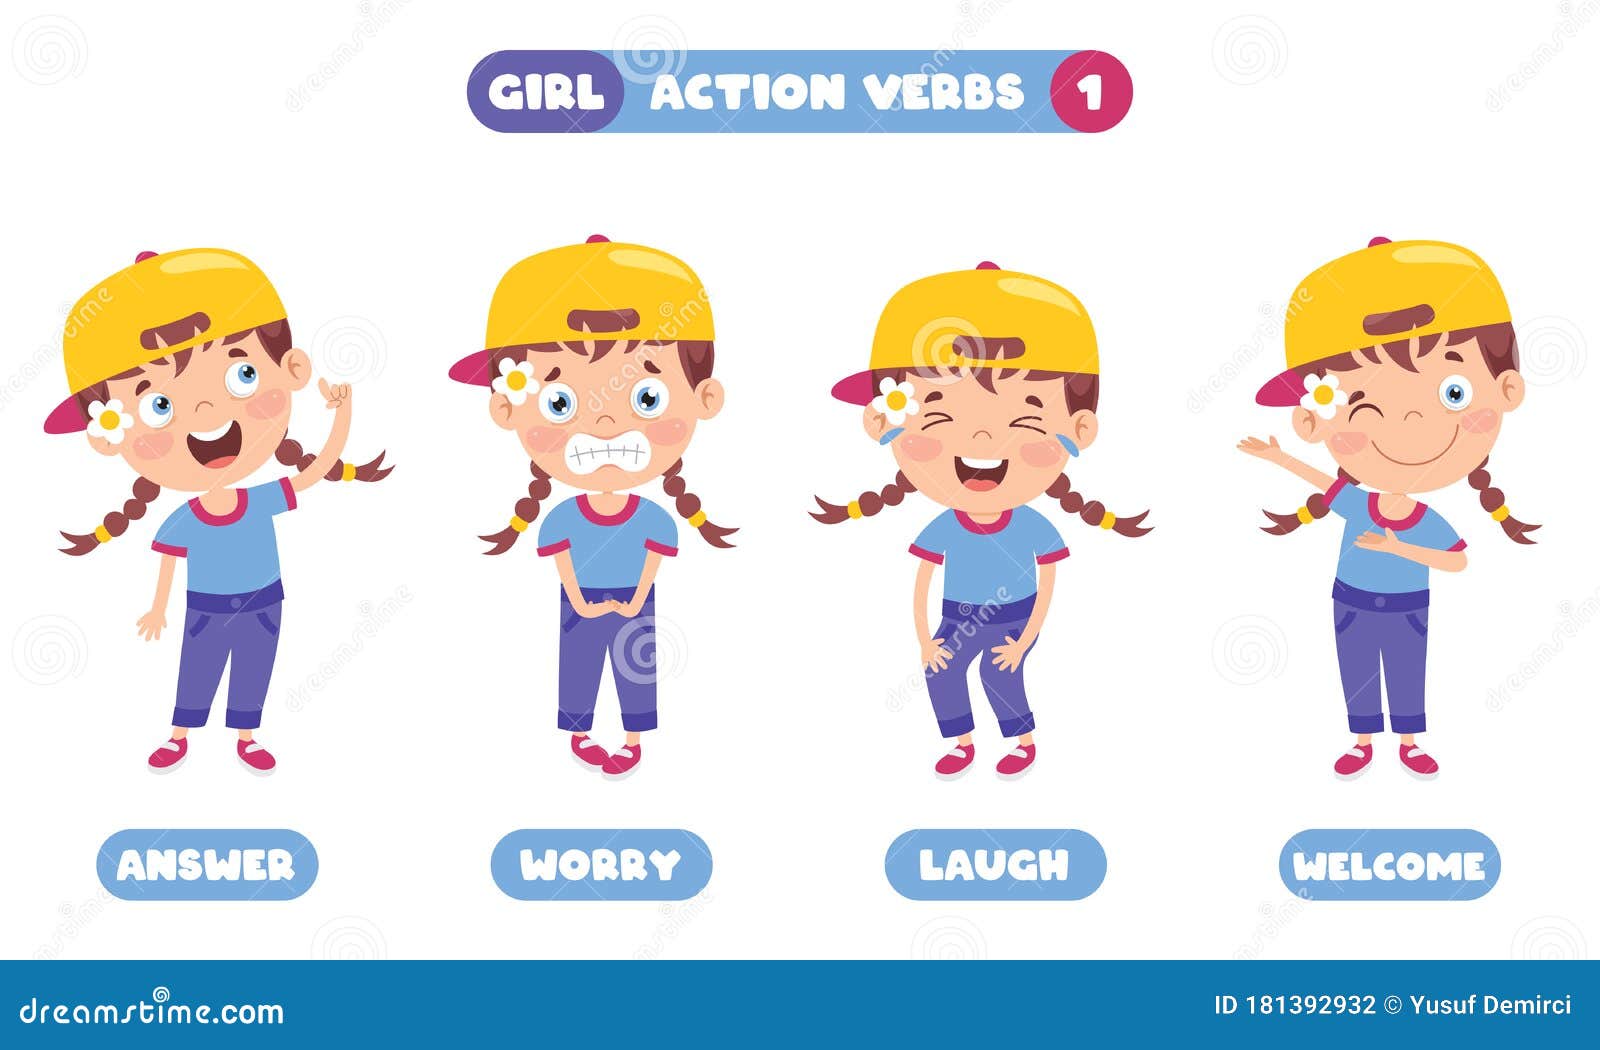 action-verbs-for-children-education-stock-vector-illustration-of-actions-collection-181392932